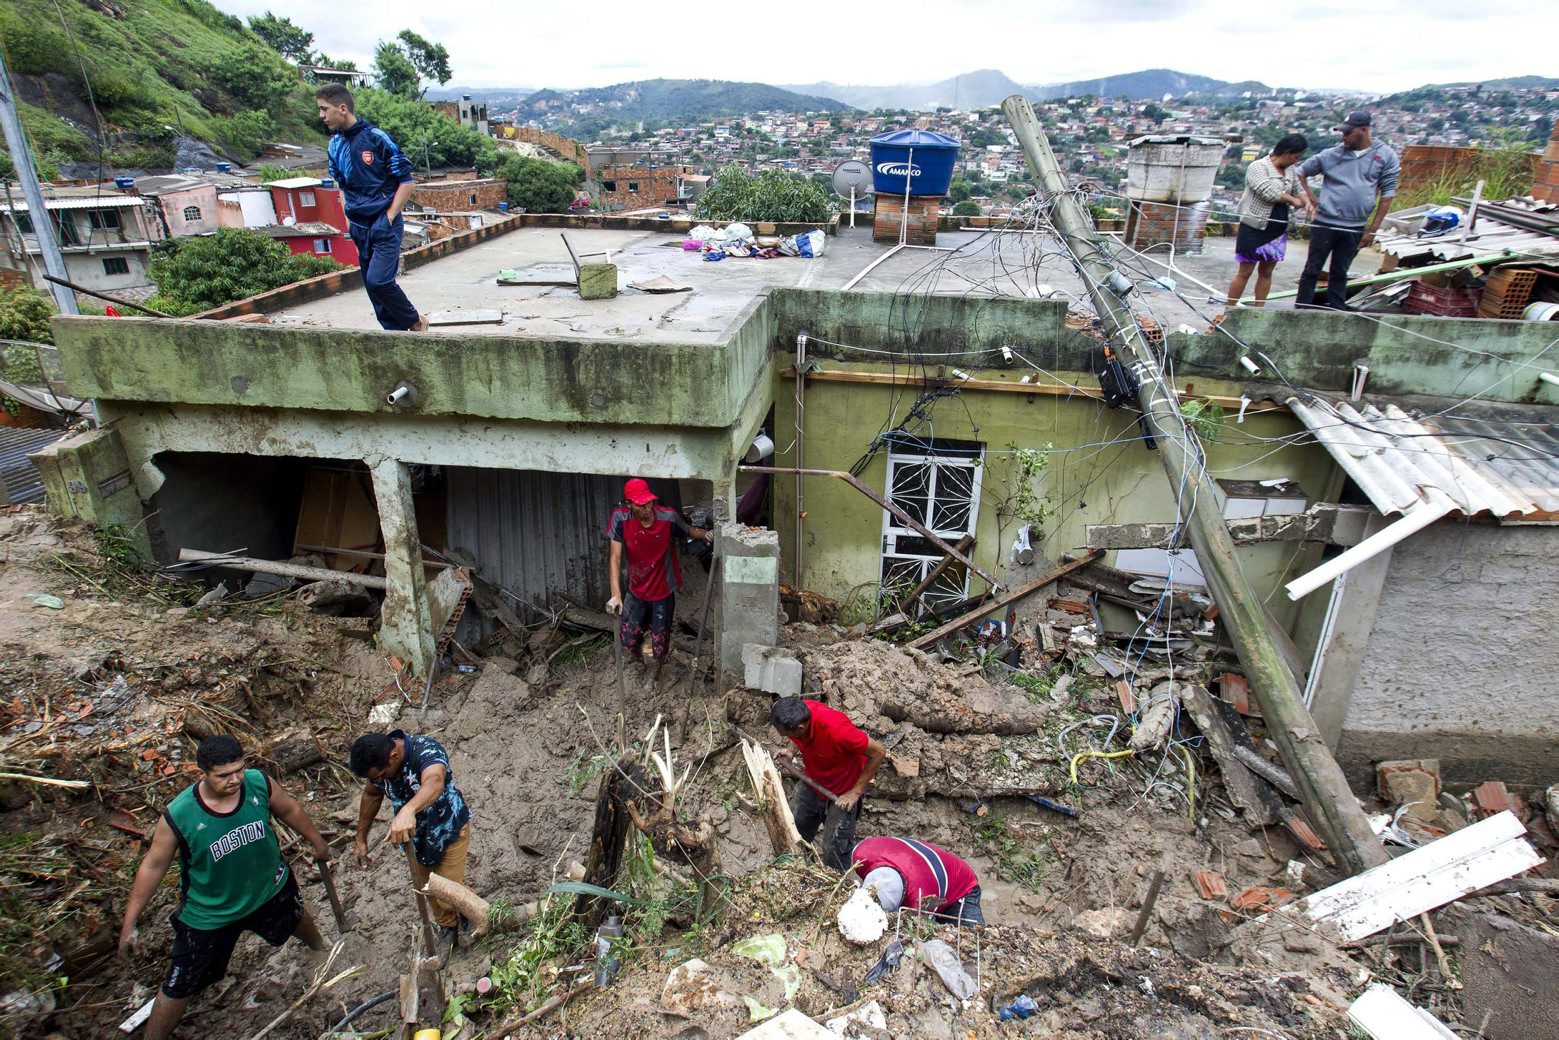 Locals work to clean up mud and debris around houses destroyed by a landslide after heavy rains in Vila Ideal neighborhood, Ibirite municipality, Minas Gerias state, Brazil, Saturday, Jan.25, 2020. Heavy rains caused flooding and landslides in southeast Brazil, killing at least 30 people, authorities said Saturday. (AP Photo/Alexandre Mota-Futura Press) Brazil Heavy Rains